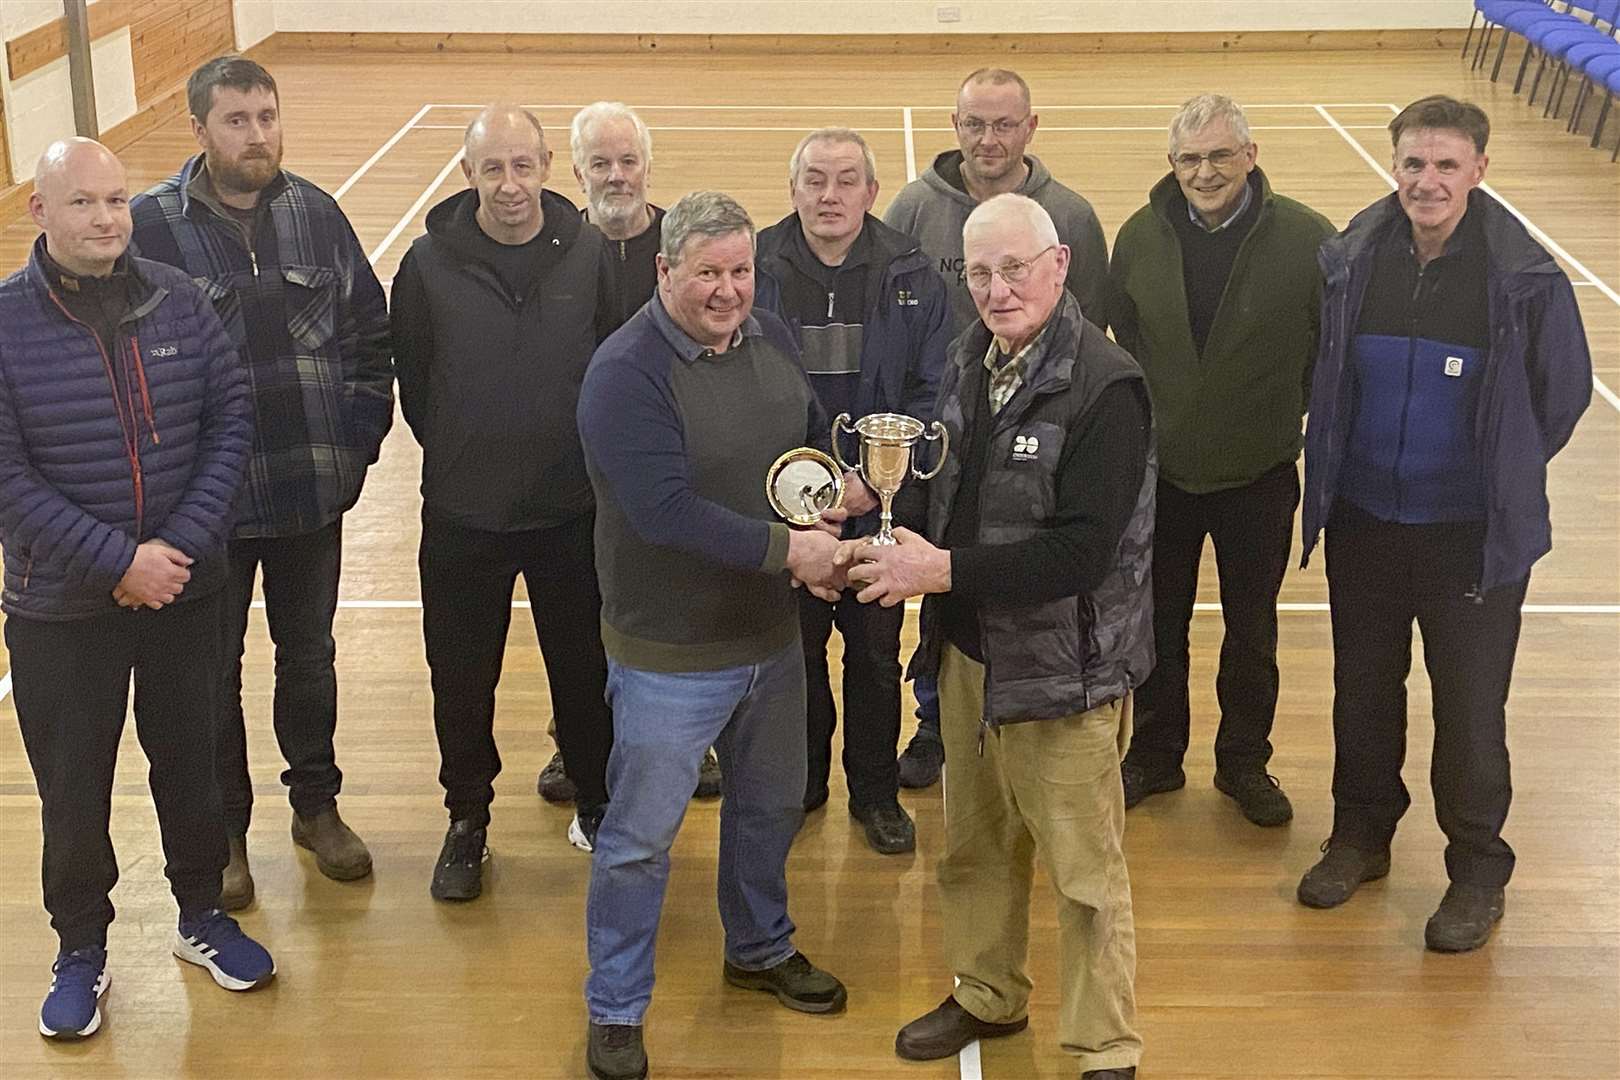 The Shearer Cup for the Caithness Indoor Shooting Championship has been won by Hugh Simpson, (left), Wick Old Stagers who is seen here receiving th trophy from Jim Manson. John Campbell, (left), Halkirk and Rognvald Brown, (2nd right), Pentland came 2nd and 3rd respectively. The competitors are selected from the top nine individual aggregates in the indoor leagues and met in Westfield to shoot a shoulder to shoulder matchplay competition to determine the winner. The other competitors are, back, from 2nd left, David Wilson, Watten, Robbie Campbell, Halkirk, Brian Young, Stevie Nicolson, David Simpson, all Wick Old Stagers and (extreme right) David Bremner, Watten.